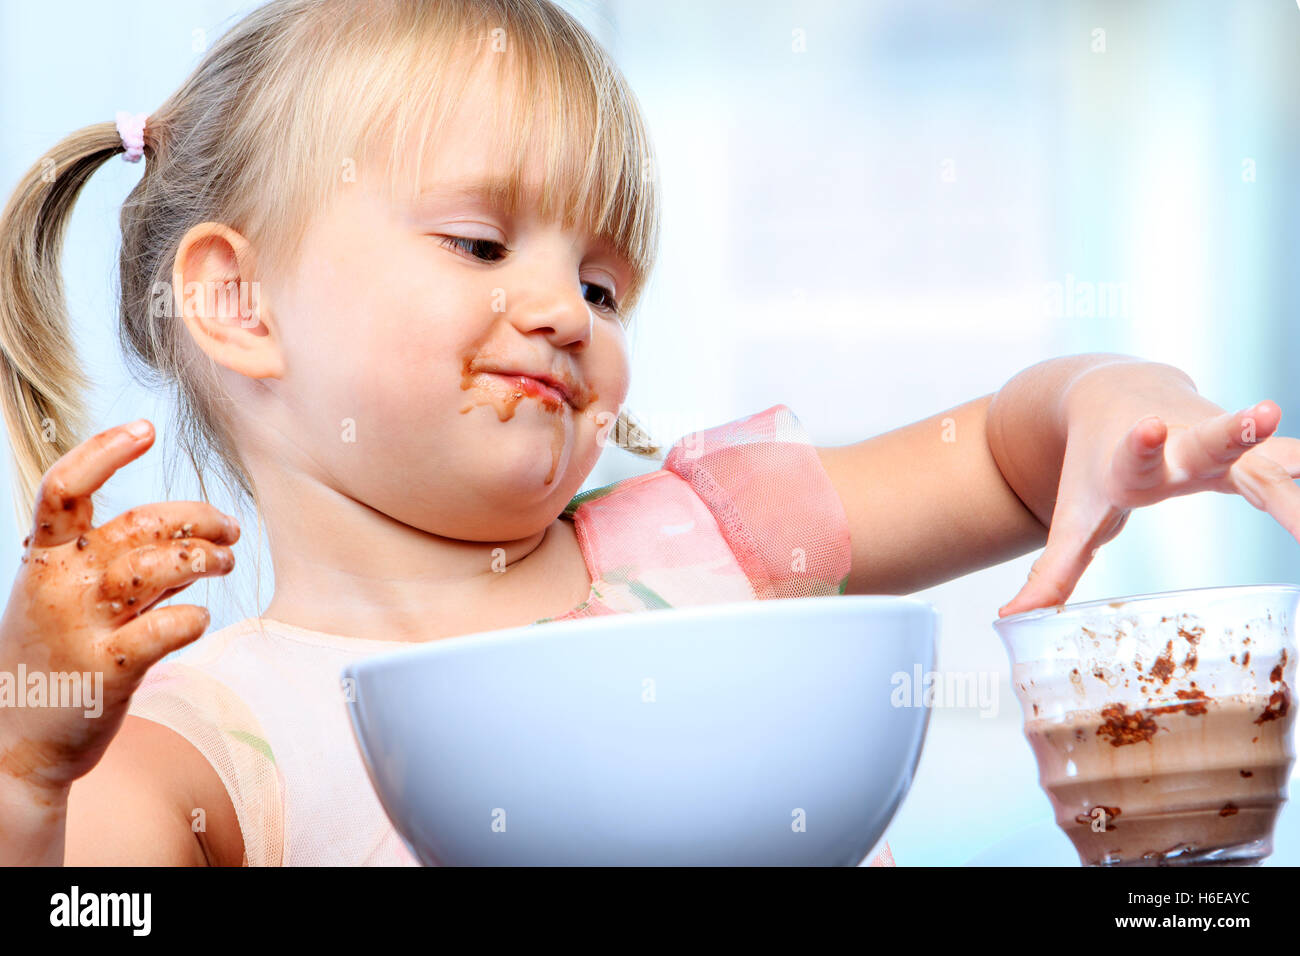 Close up portrait of little girl at breakfast. Infant spilling and playing around with chocolate  milk. Stock Photo